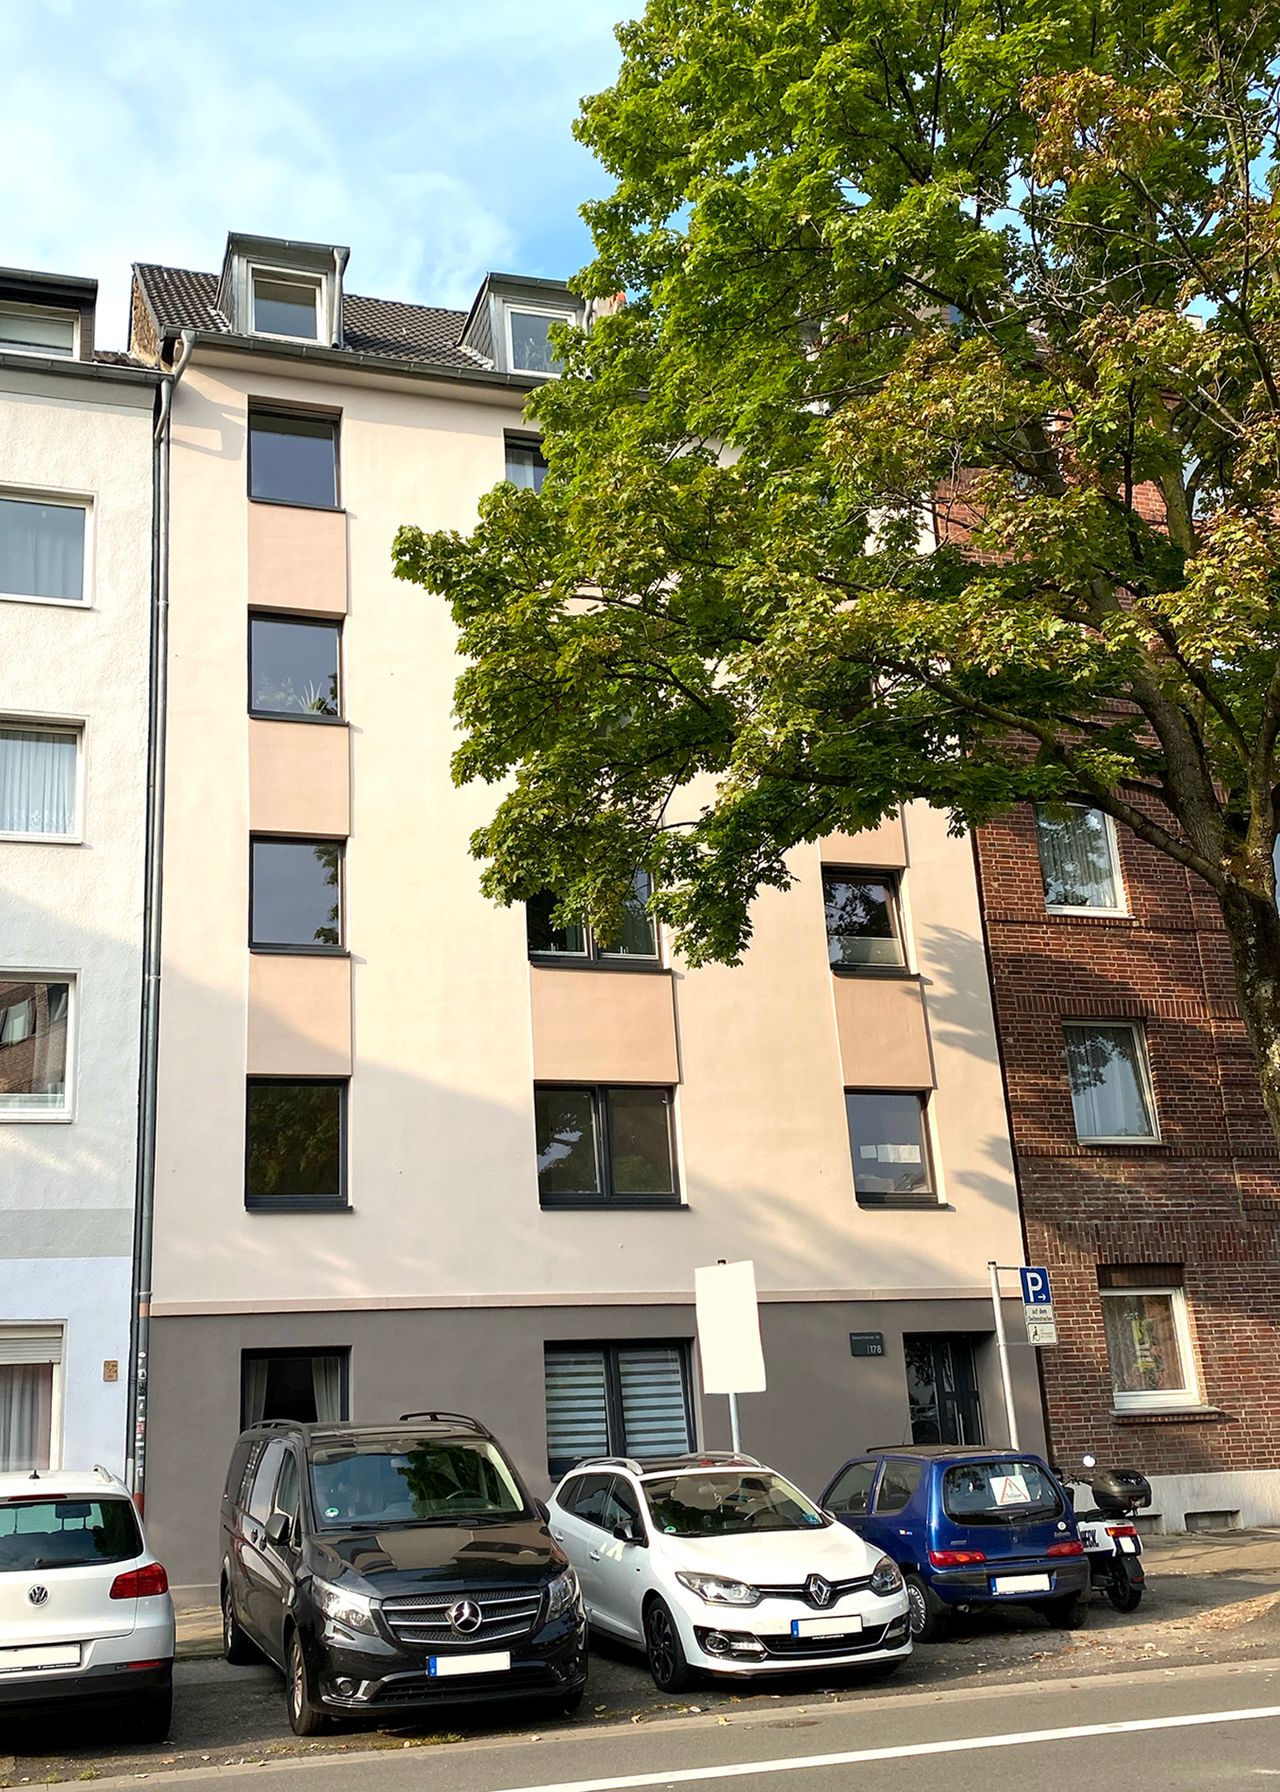 Wonderful bright, almost secluded apartment in the middle of Düsseldorf with a large roof terrace facing west